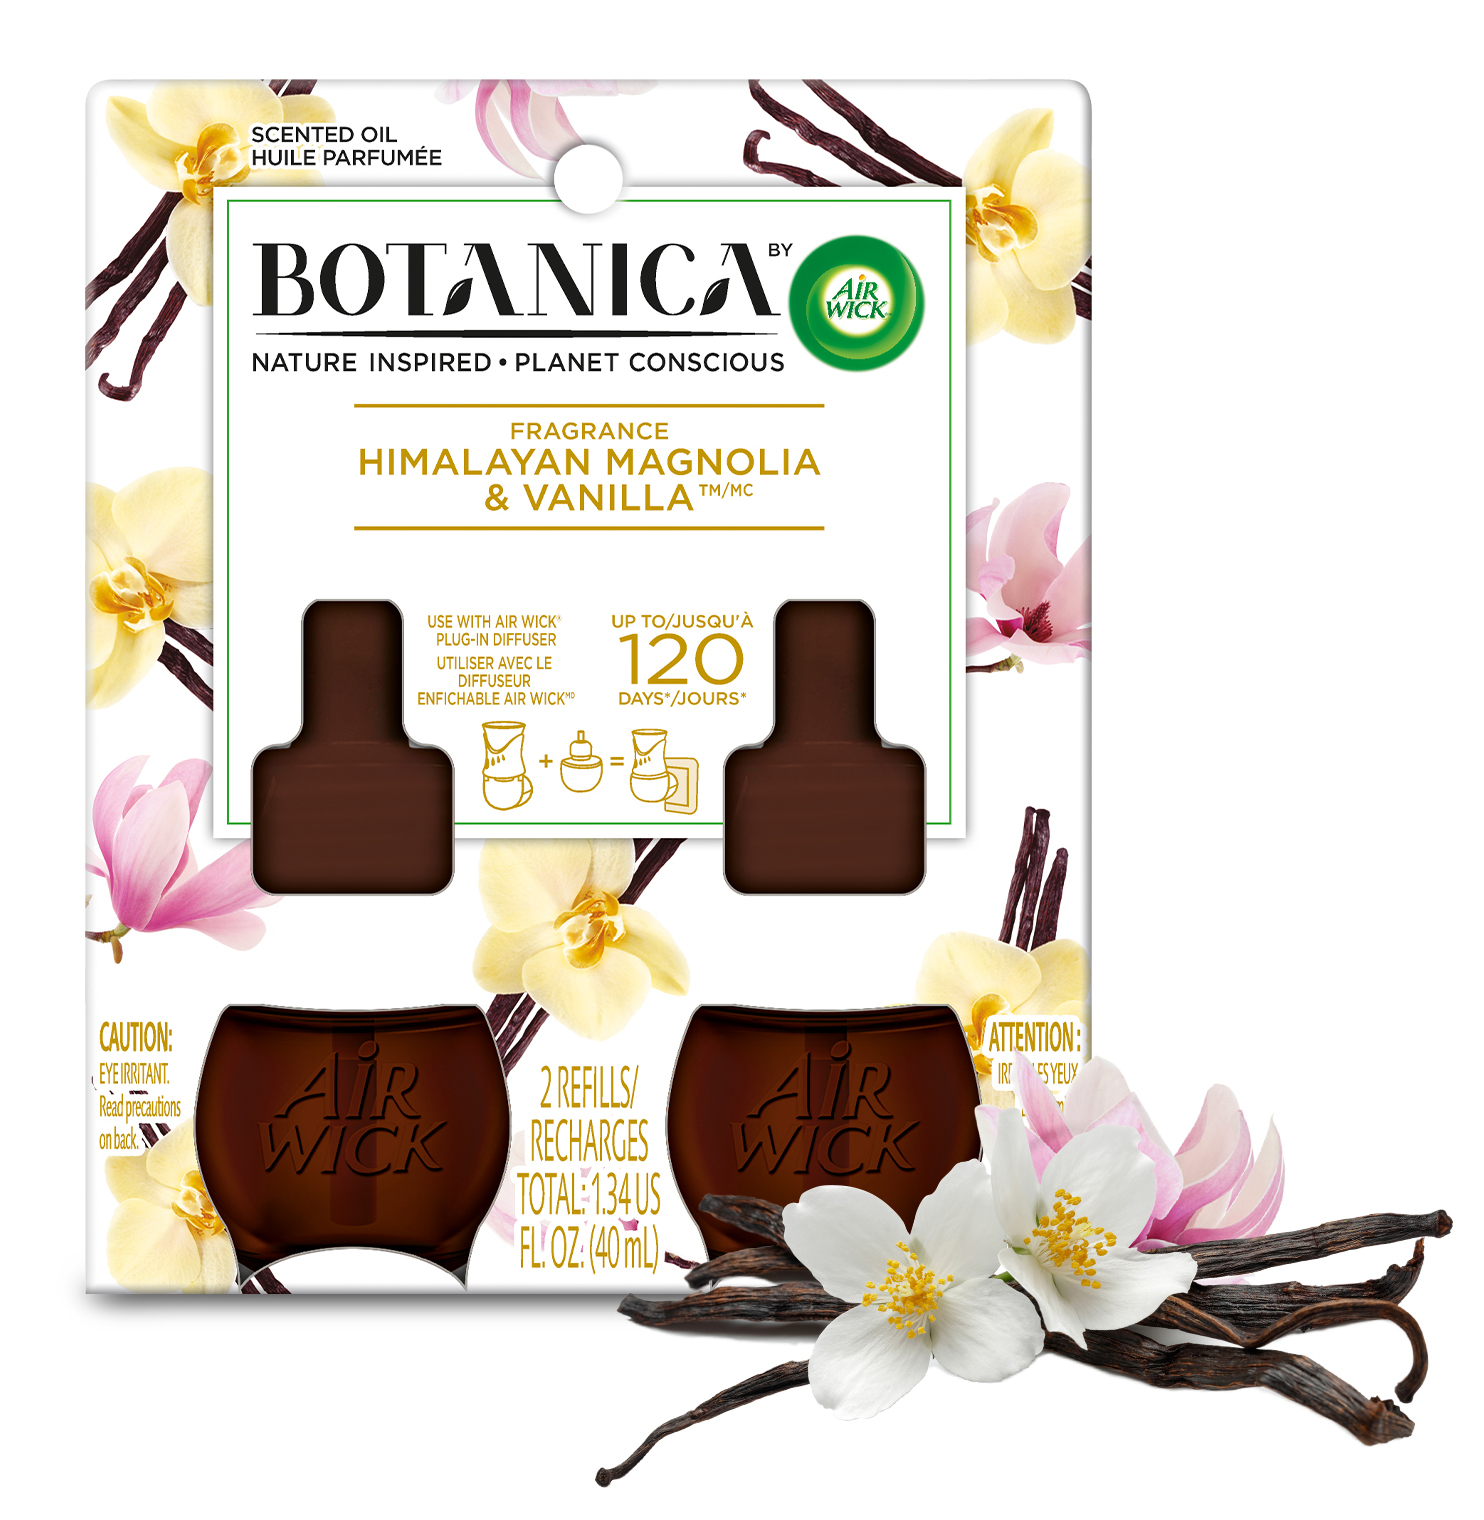 Botanica by Air Wick Plug in Scented Oil Refill, 2 Ct, Himalayan Magnolia and Vanilla, Natural Ingredients, Essential Oils, Air Freshener Air Fresheners